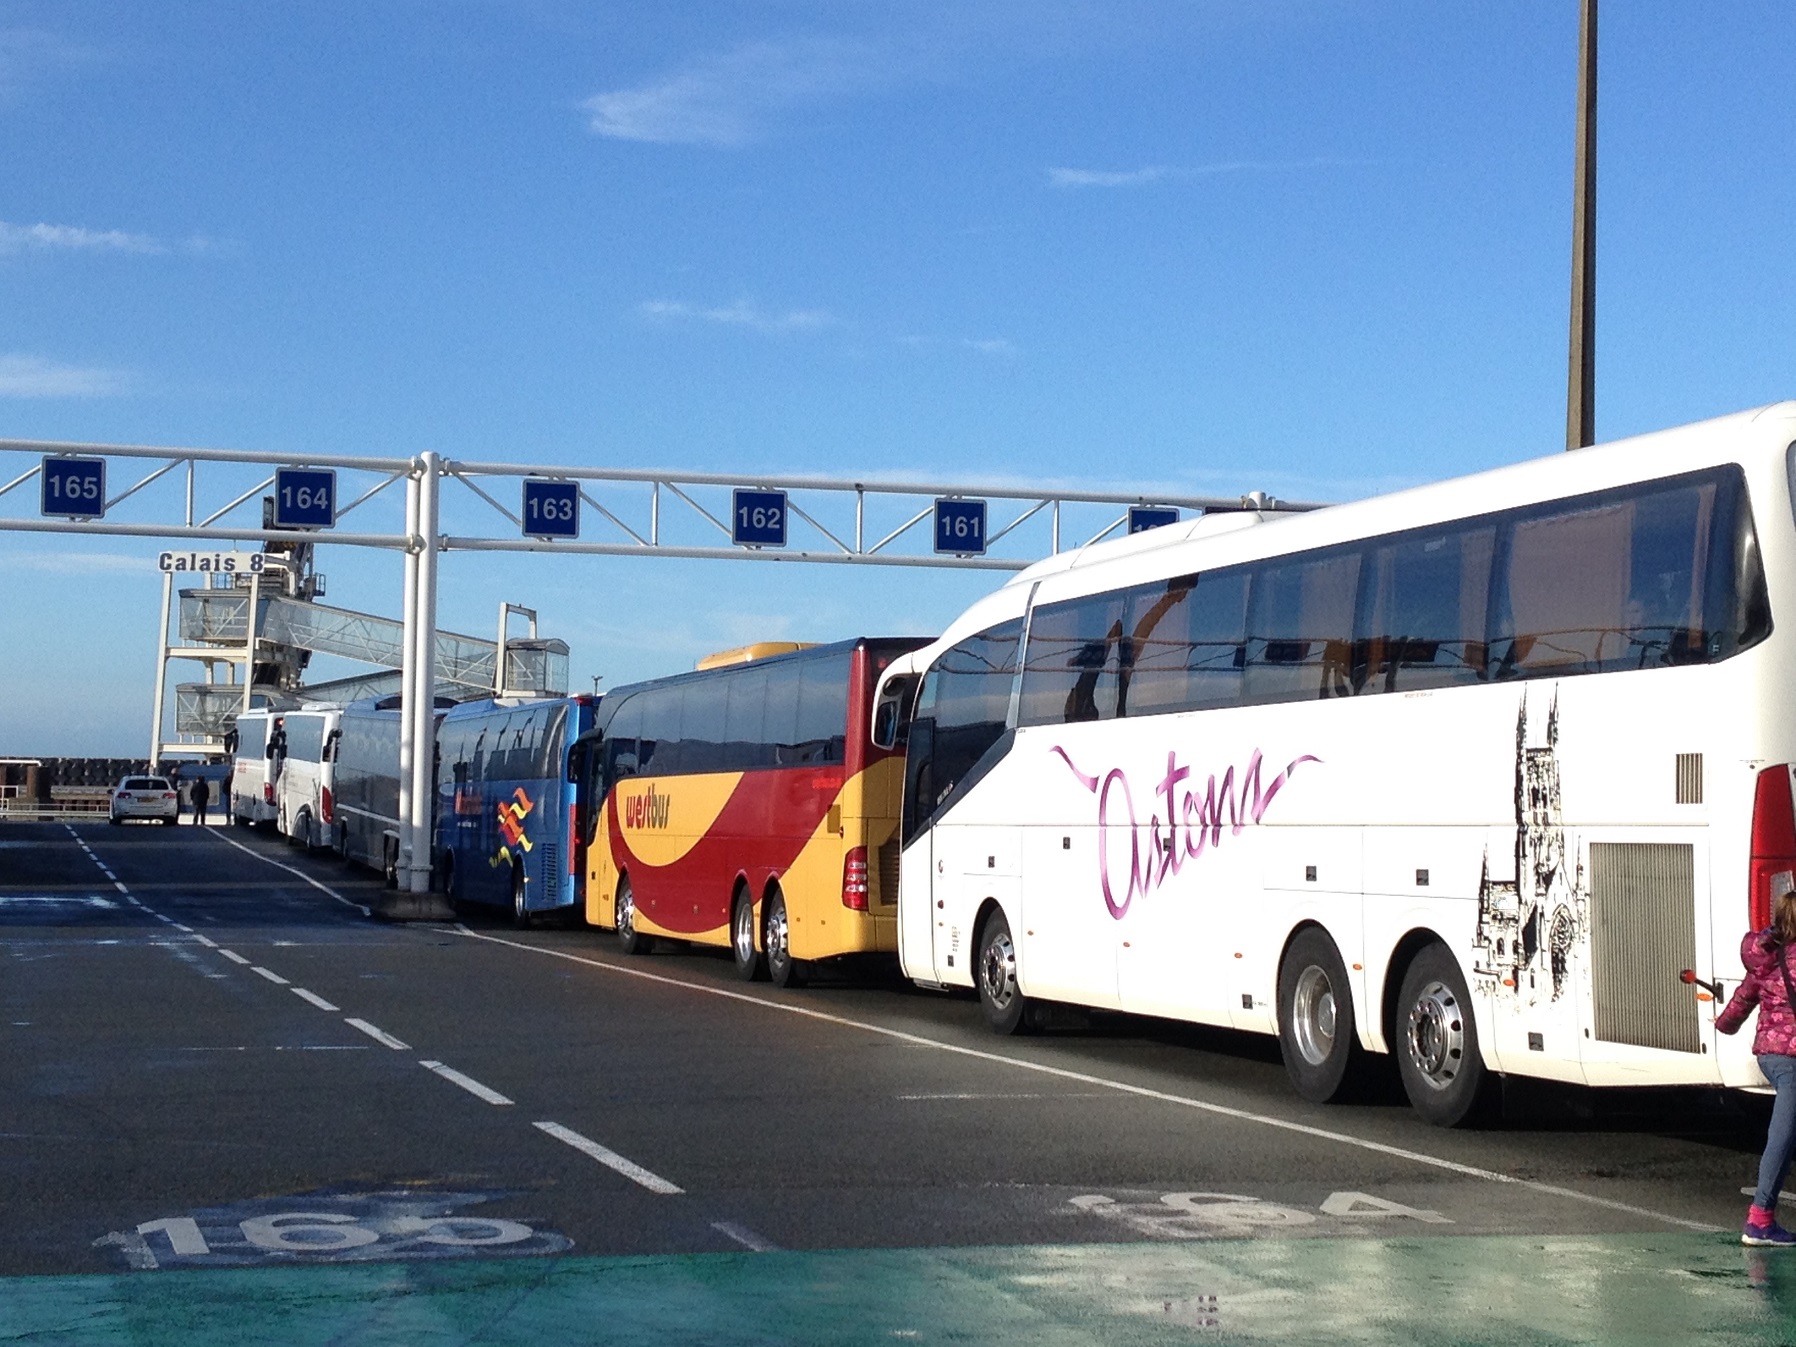 Cross channel coach line up waiting in Calais